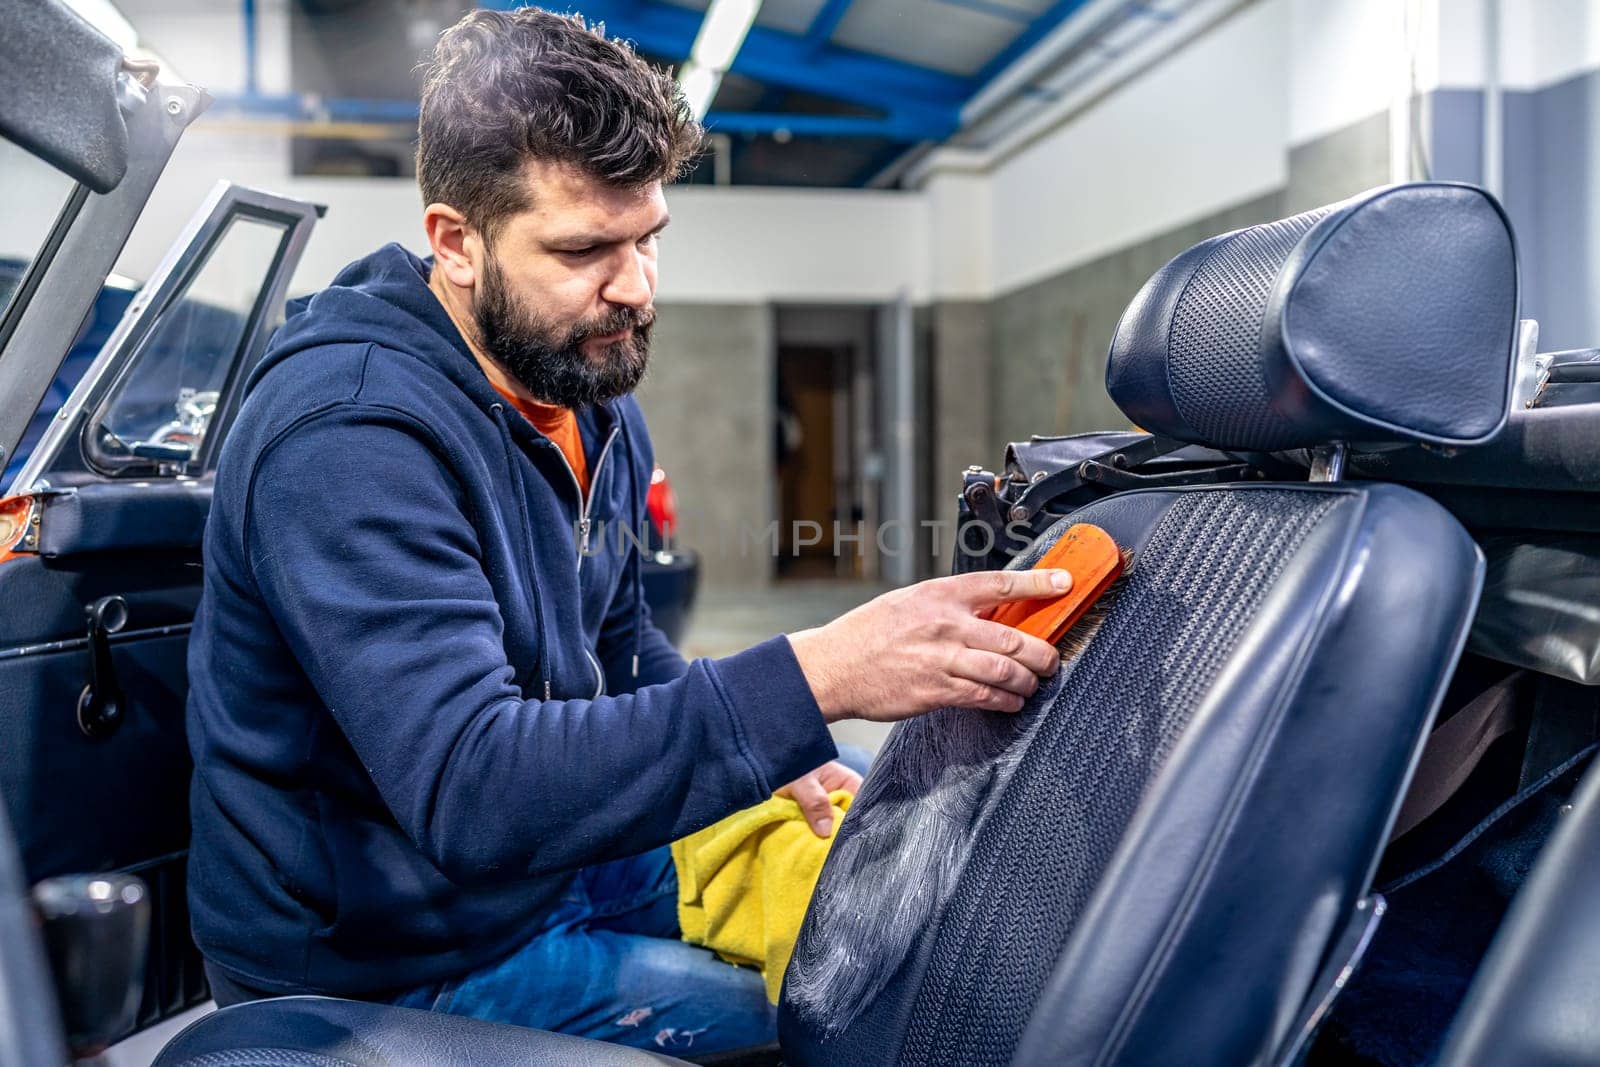 cleaning leather car seats with a brush and chemicals by Edophoto